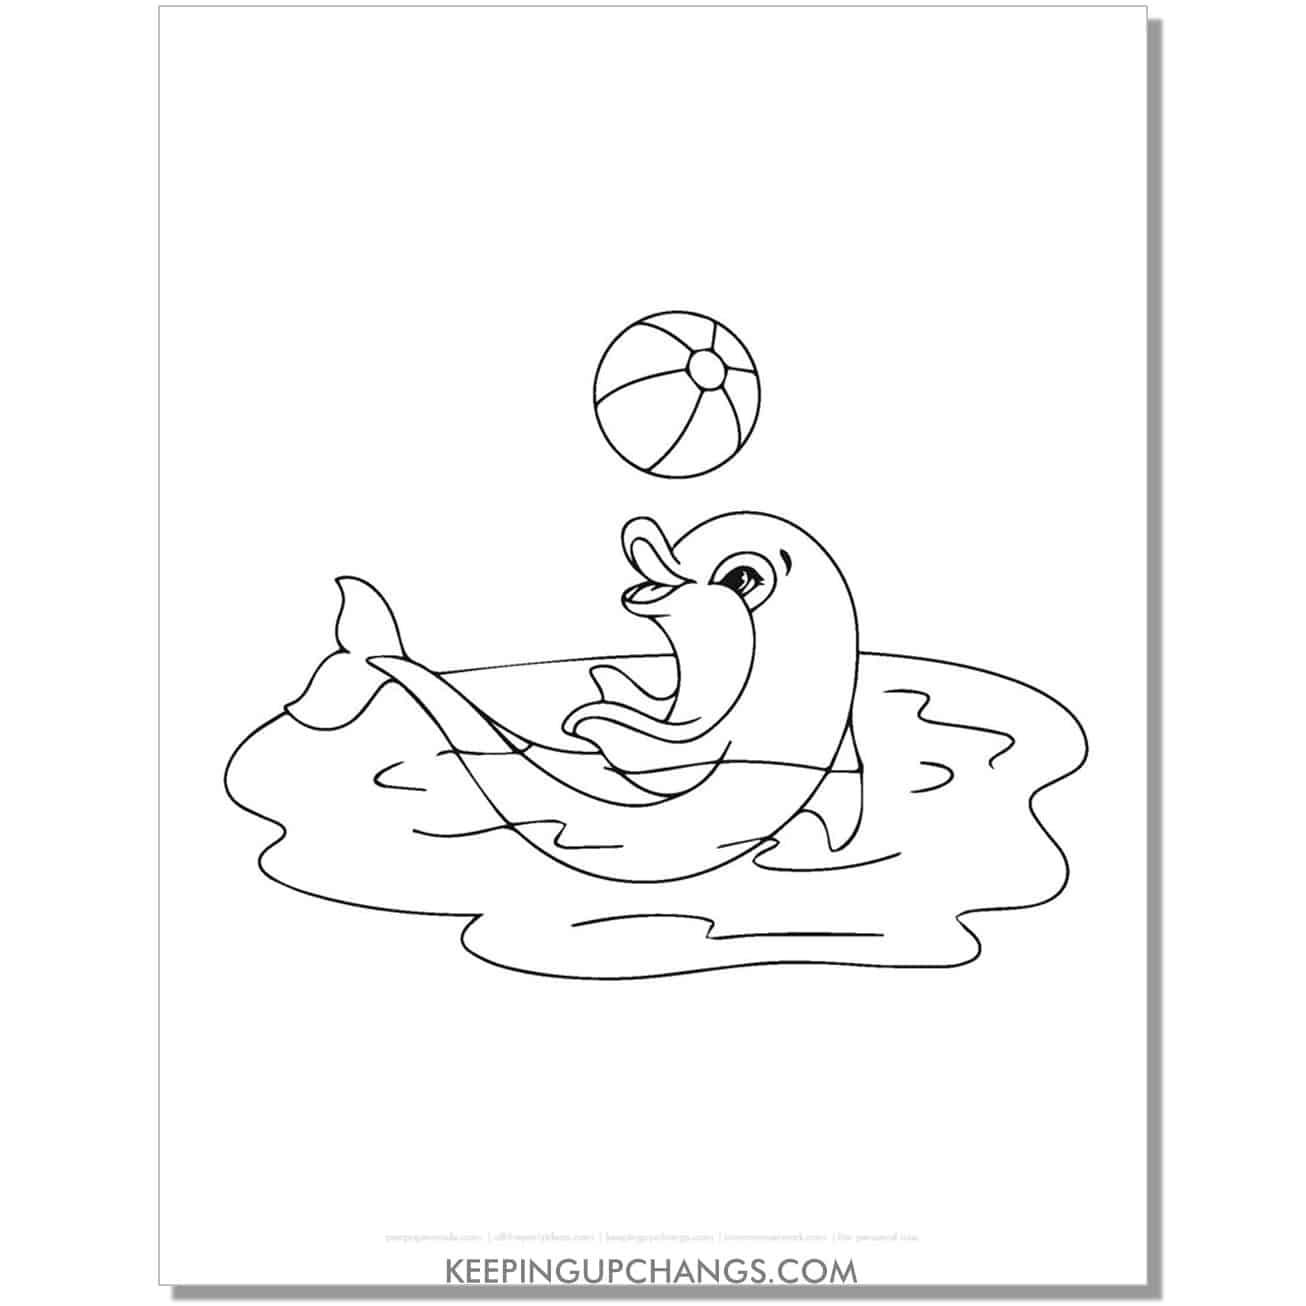 free dolphin submerged in water bouncing ball coloring page, sheet.